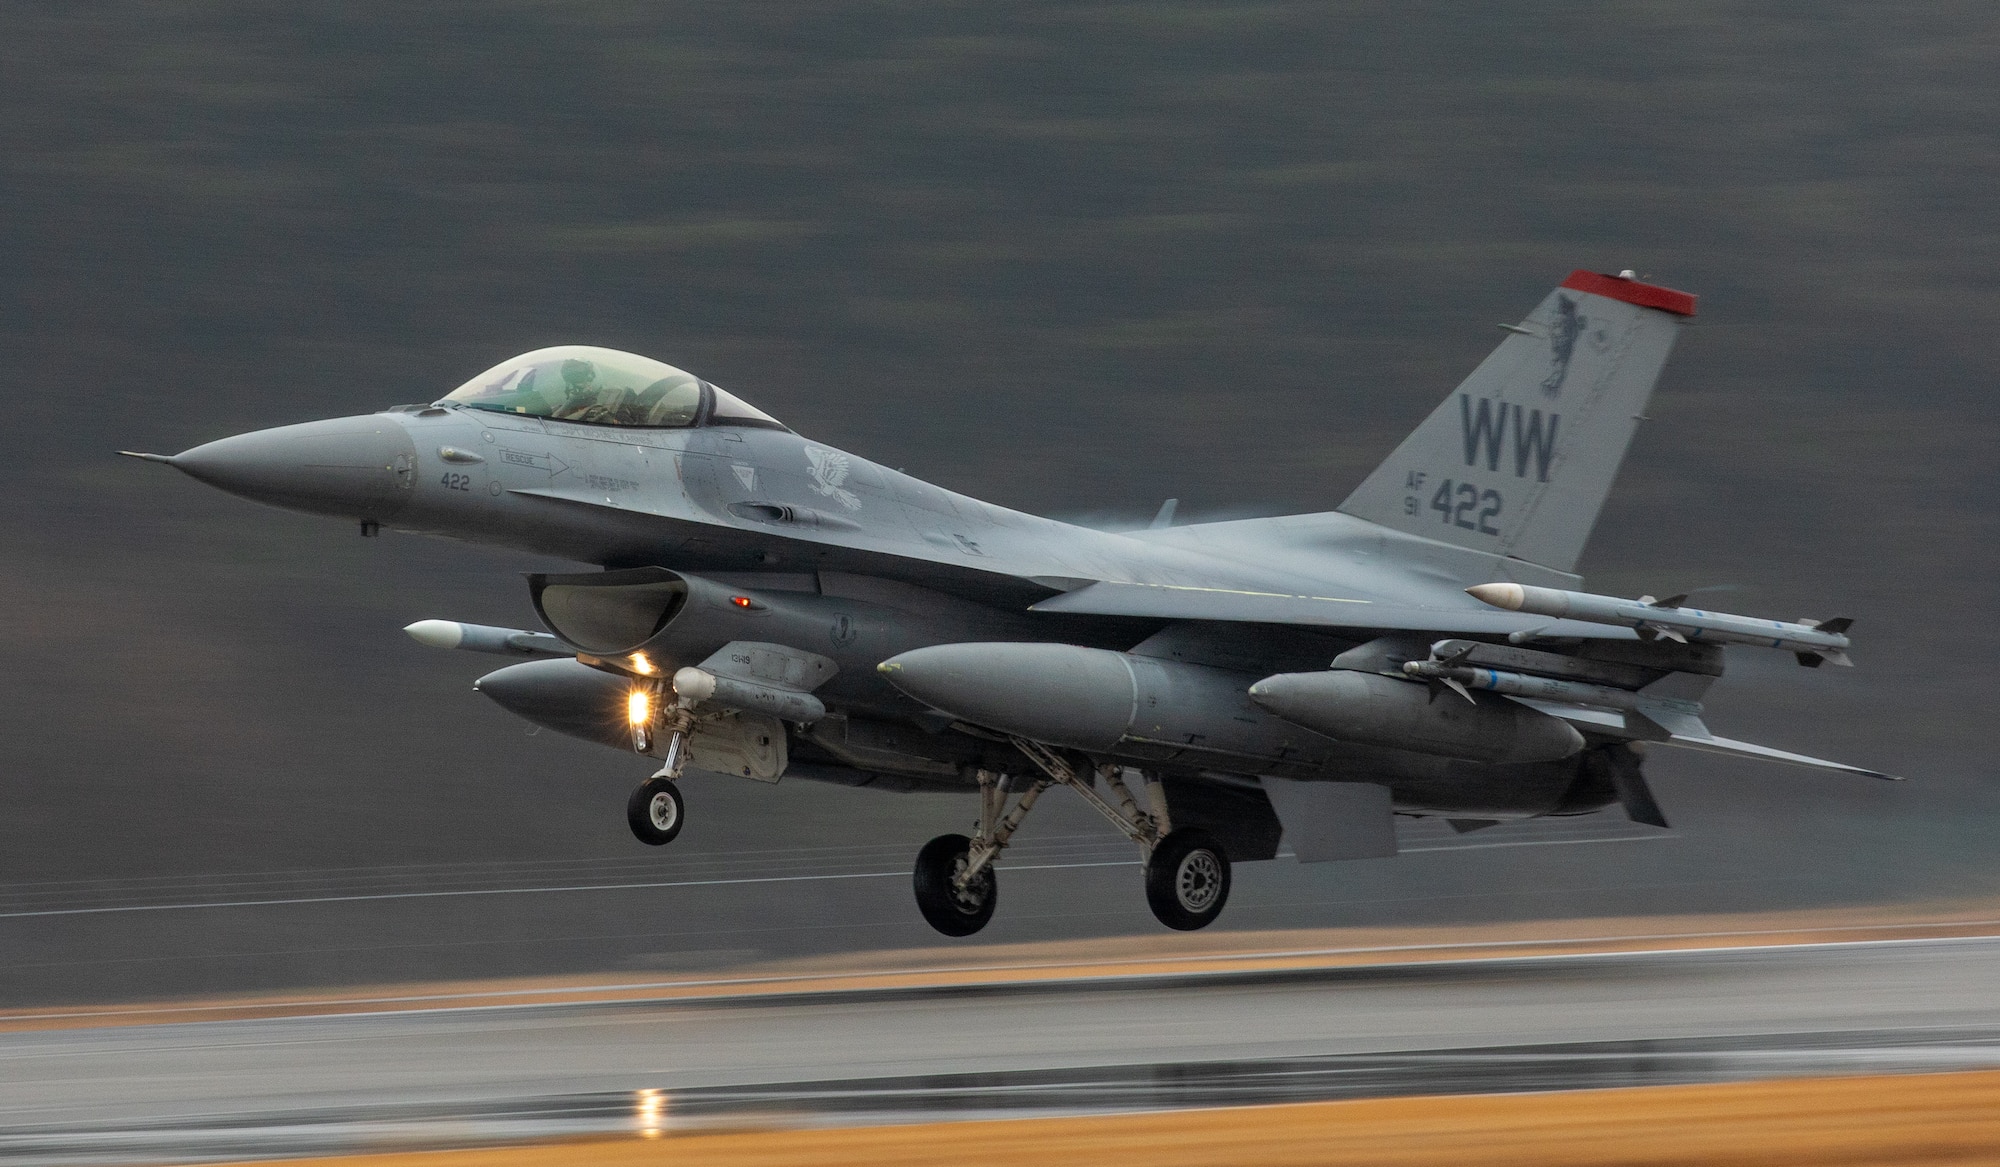 An F-16 takes off from the flight line. The background is blurry and the subject is clear.